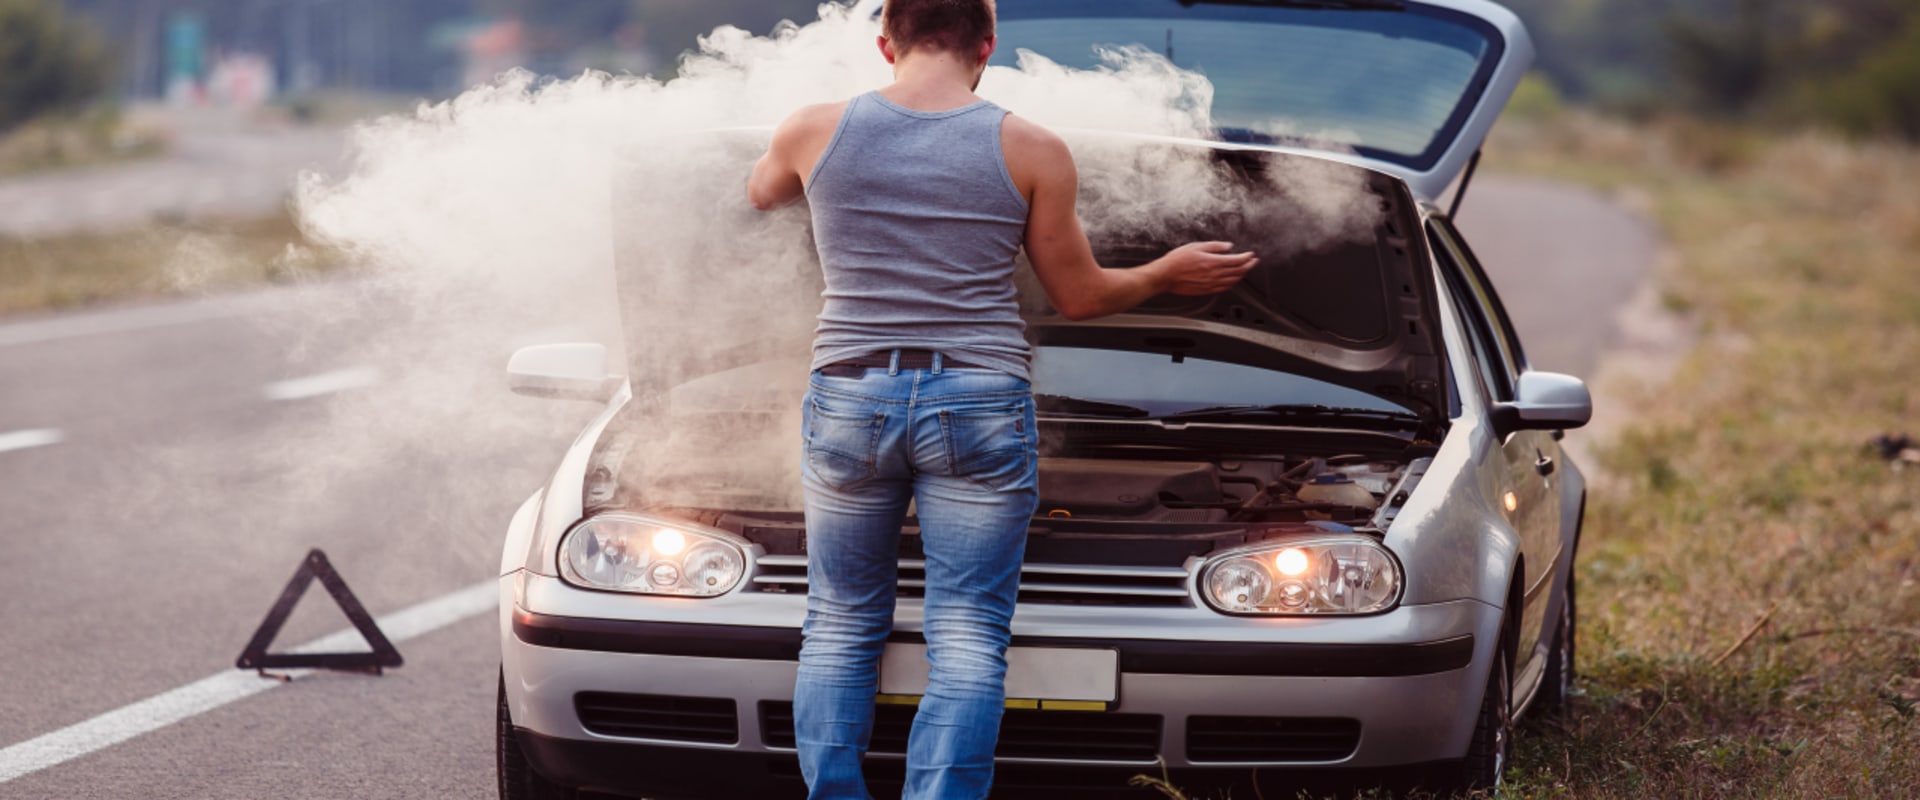 How do you know if your car is in bad condition?